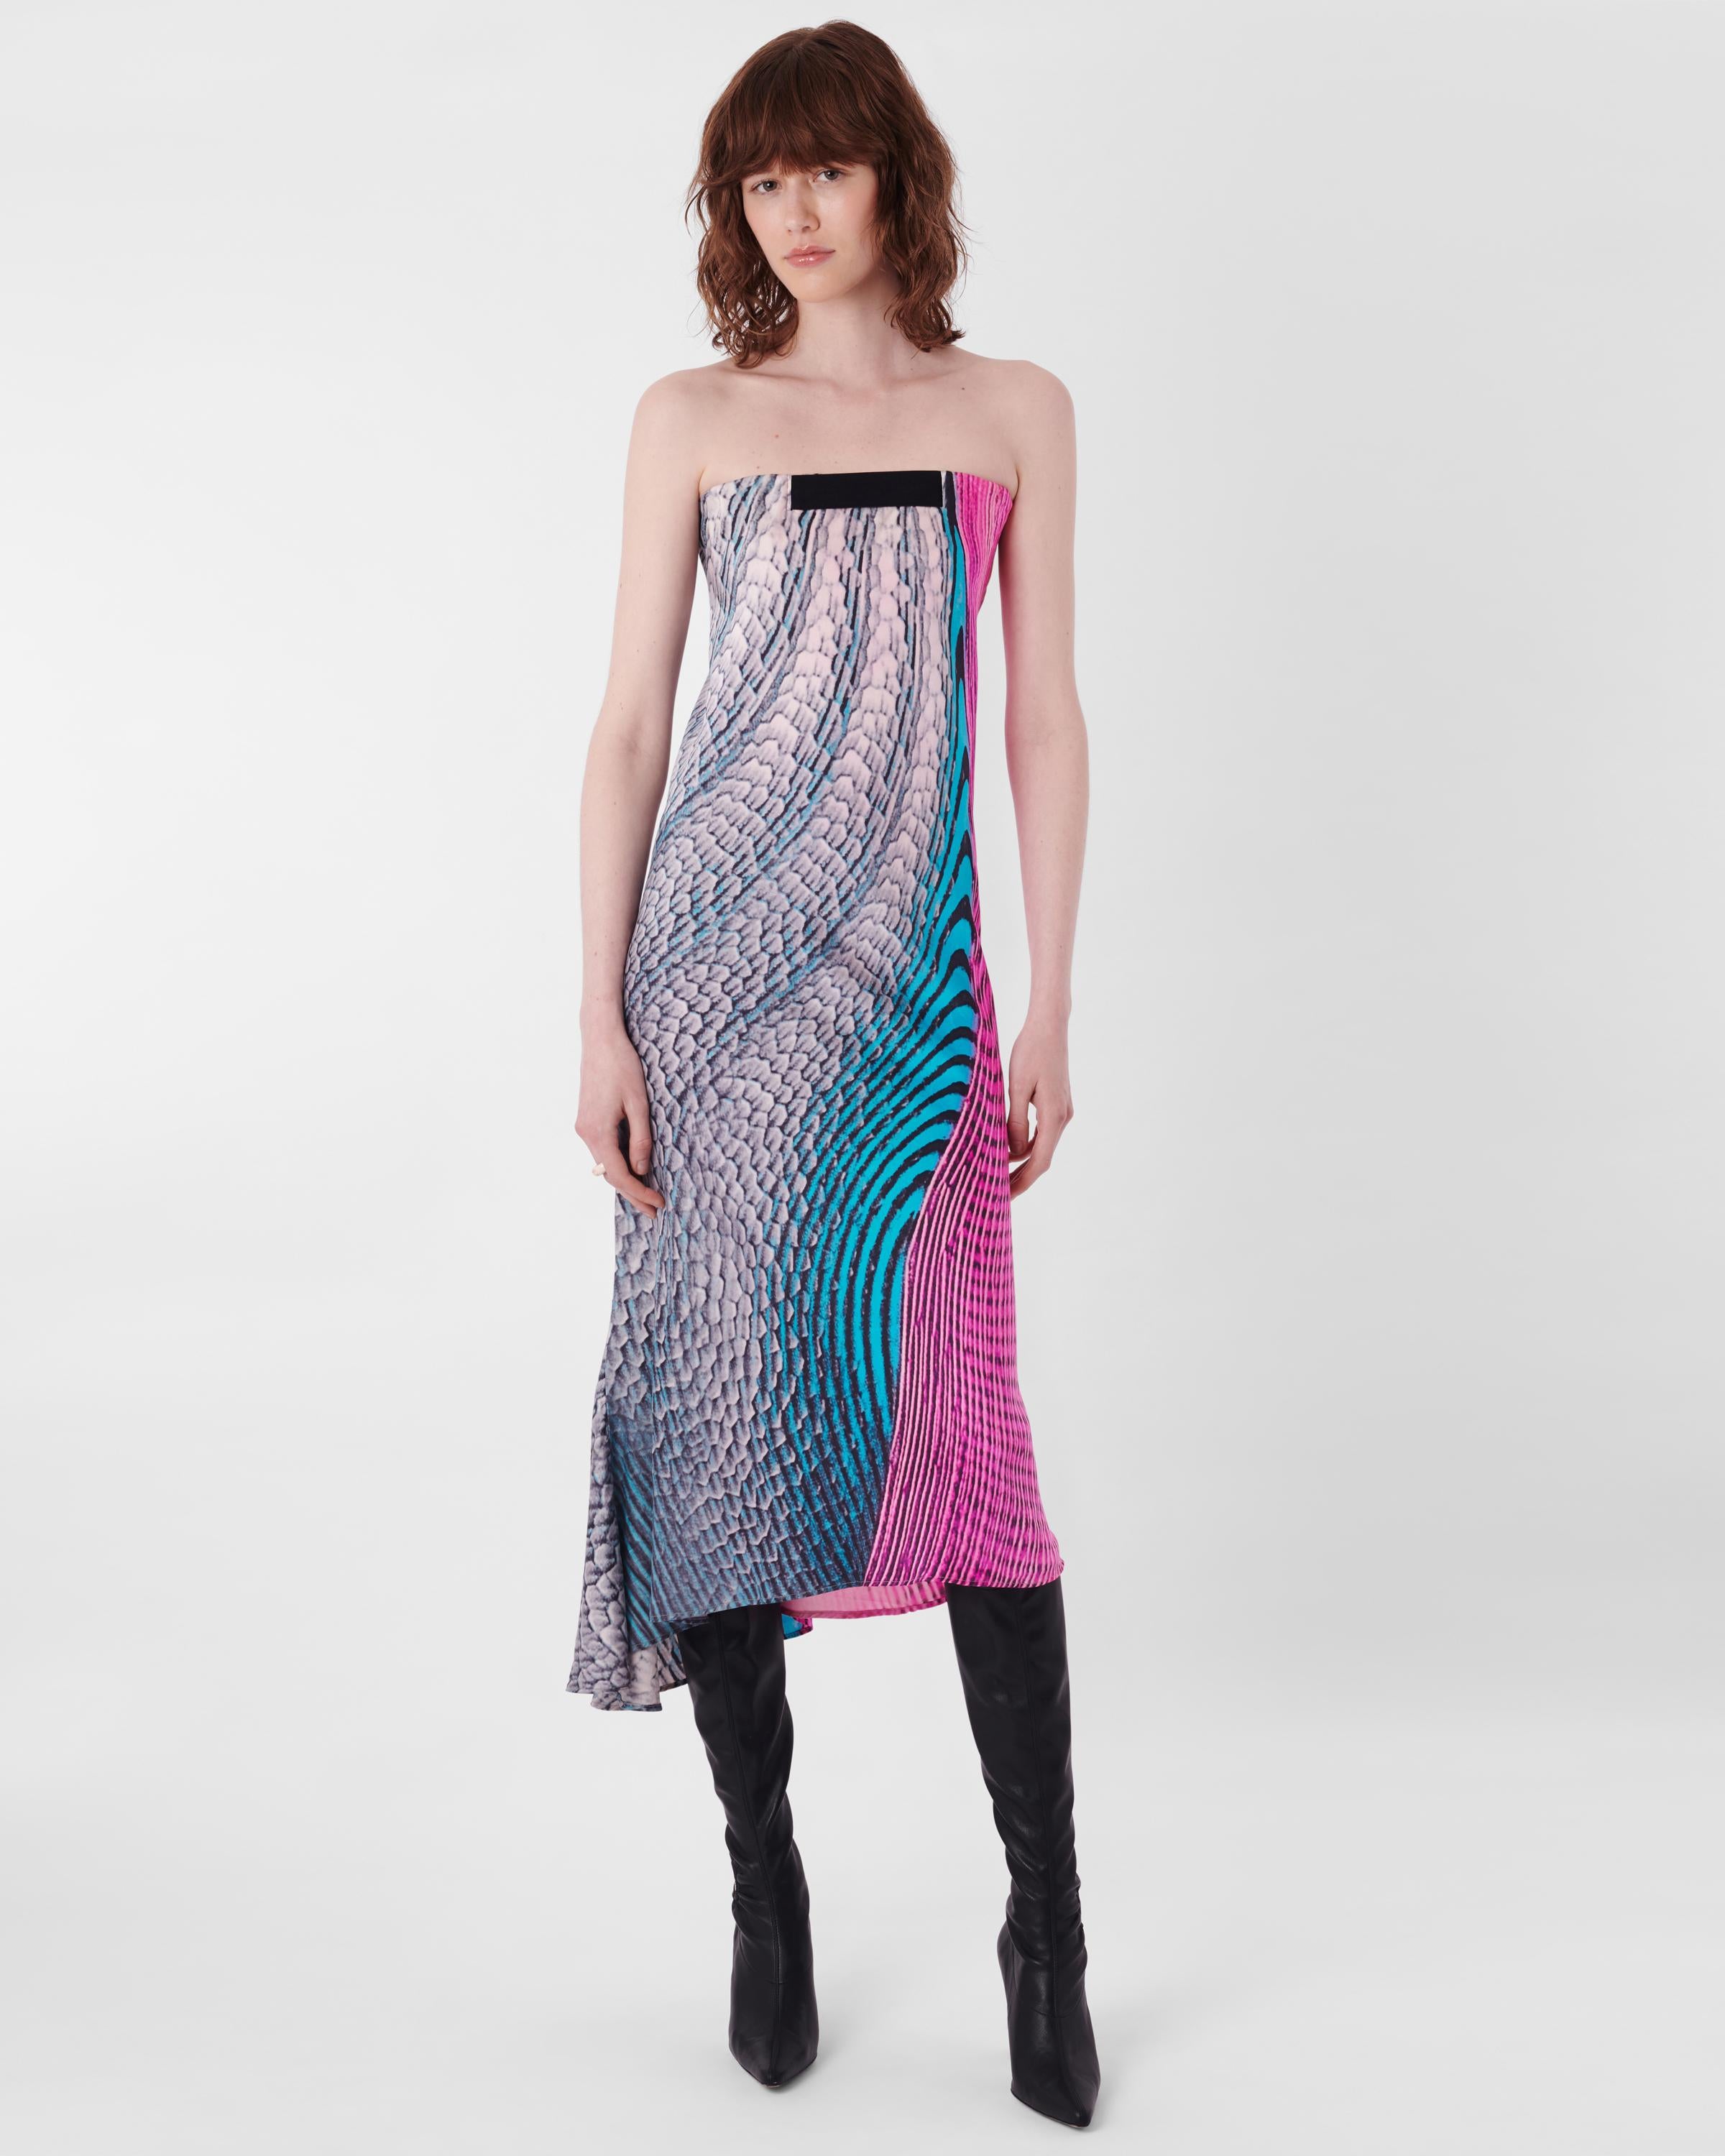 Roberto Cavalli S/S 2001 Mermaid Print Maxi Skirt In Excellent Condition In London, GB